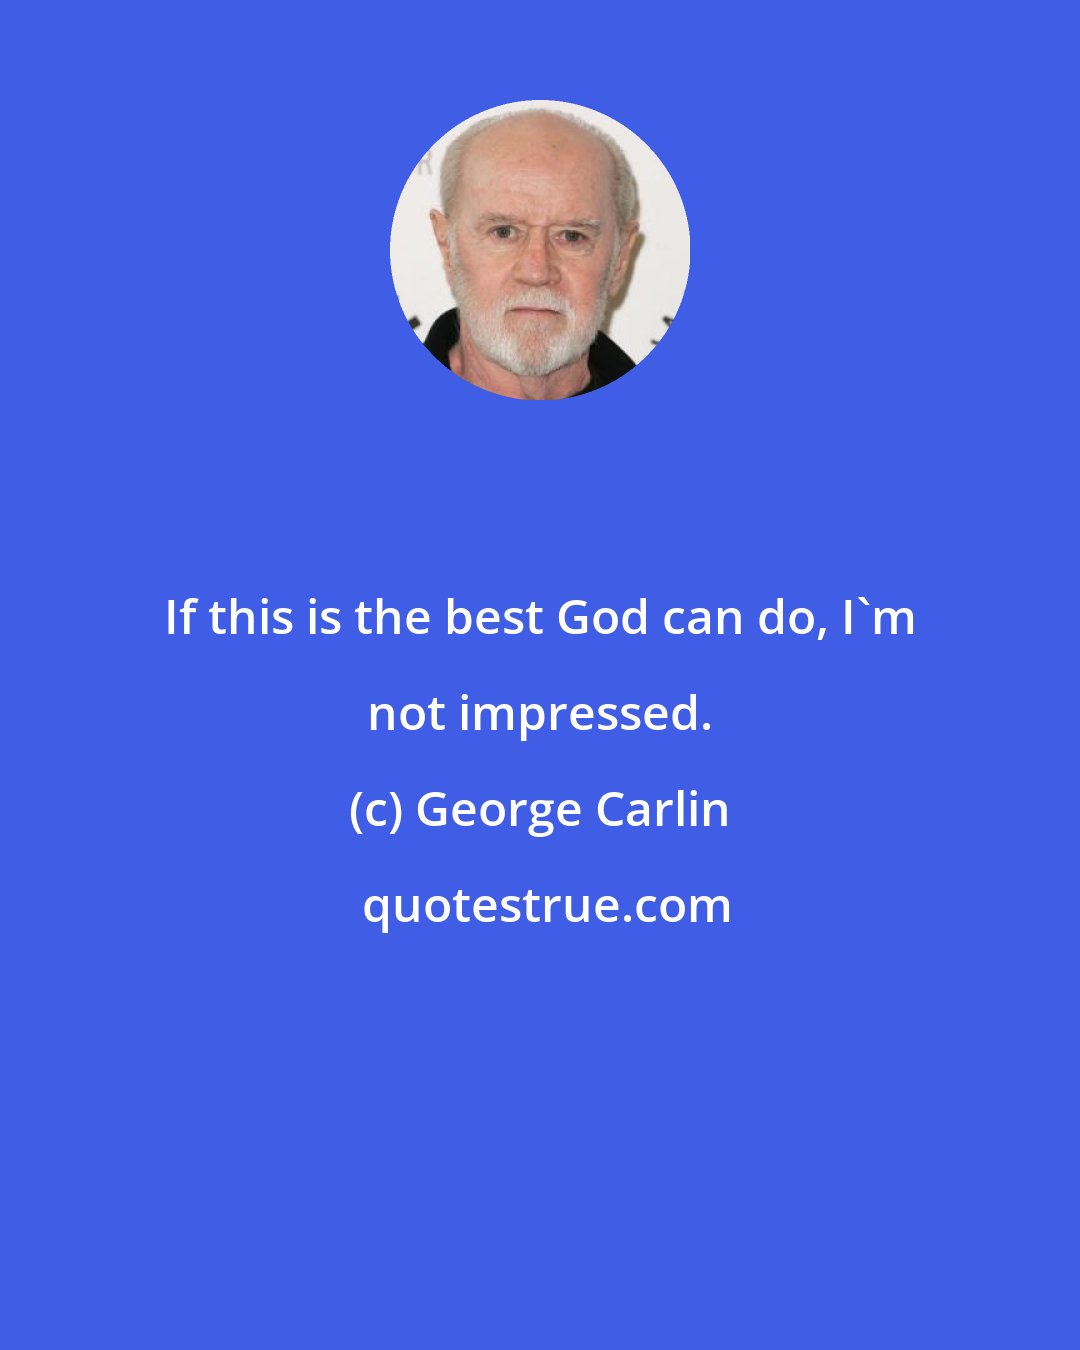 George Carlin: If this is the best God can do, I'm not impressed.